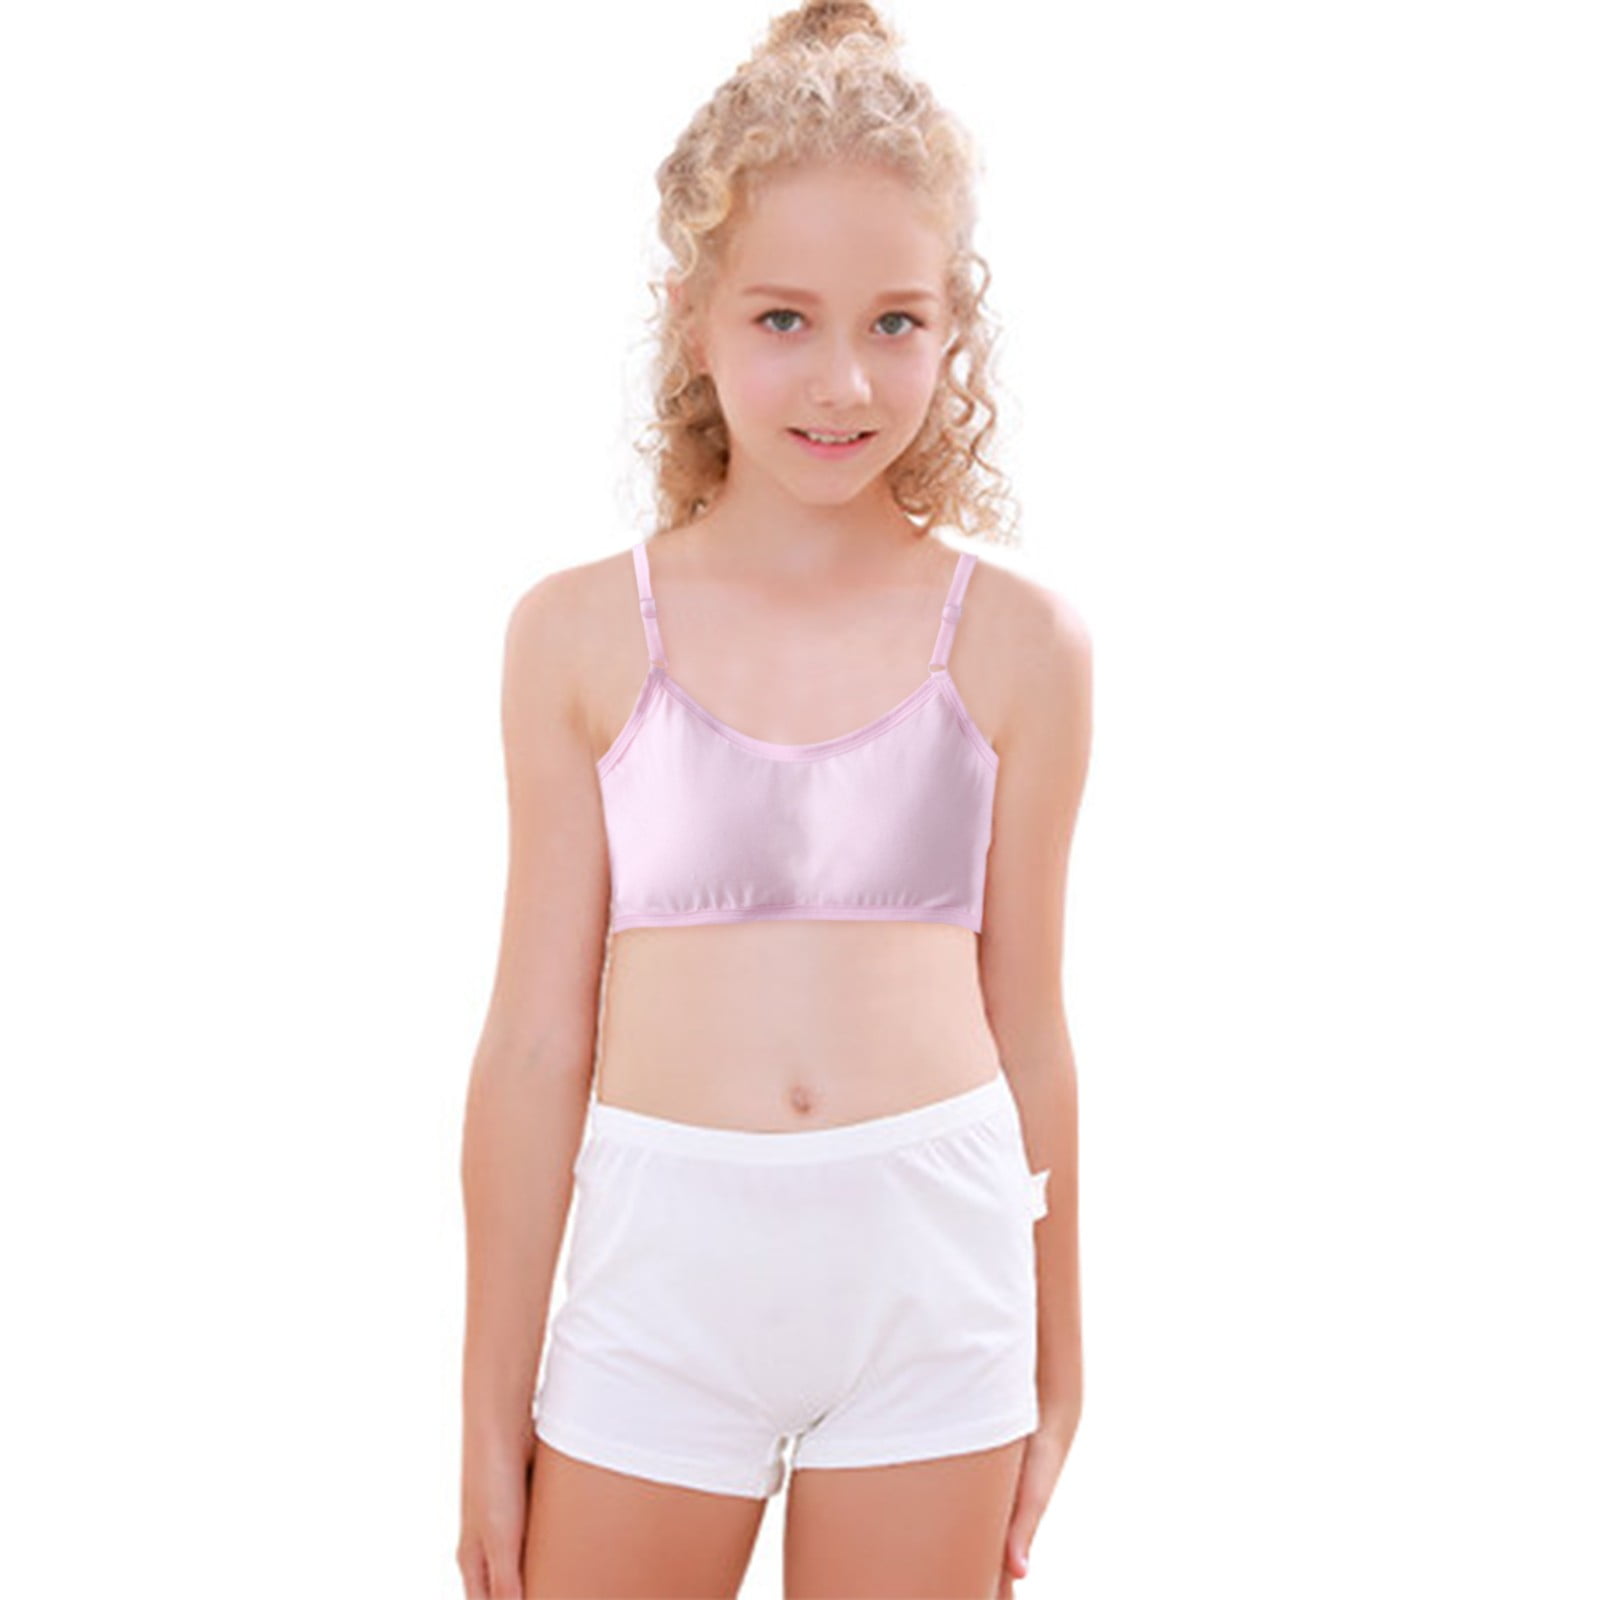 Young Girls Underwear Set Teenage Clothes Sets Teenager Sport